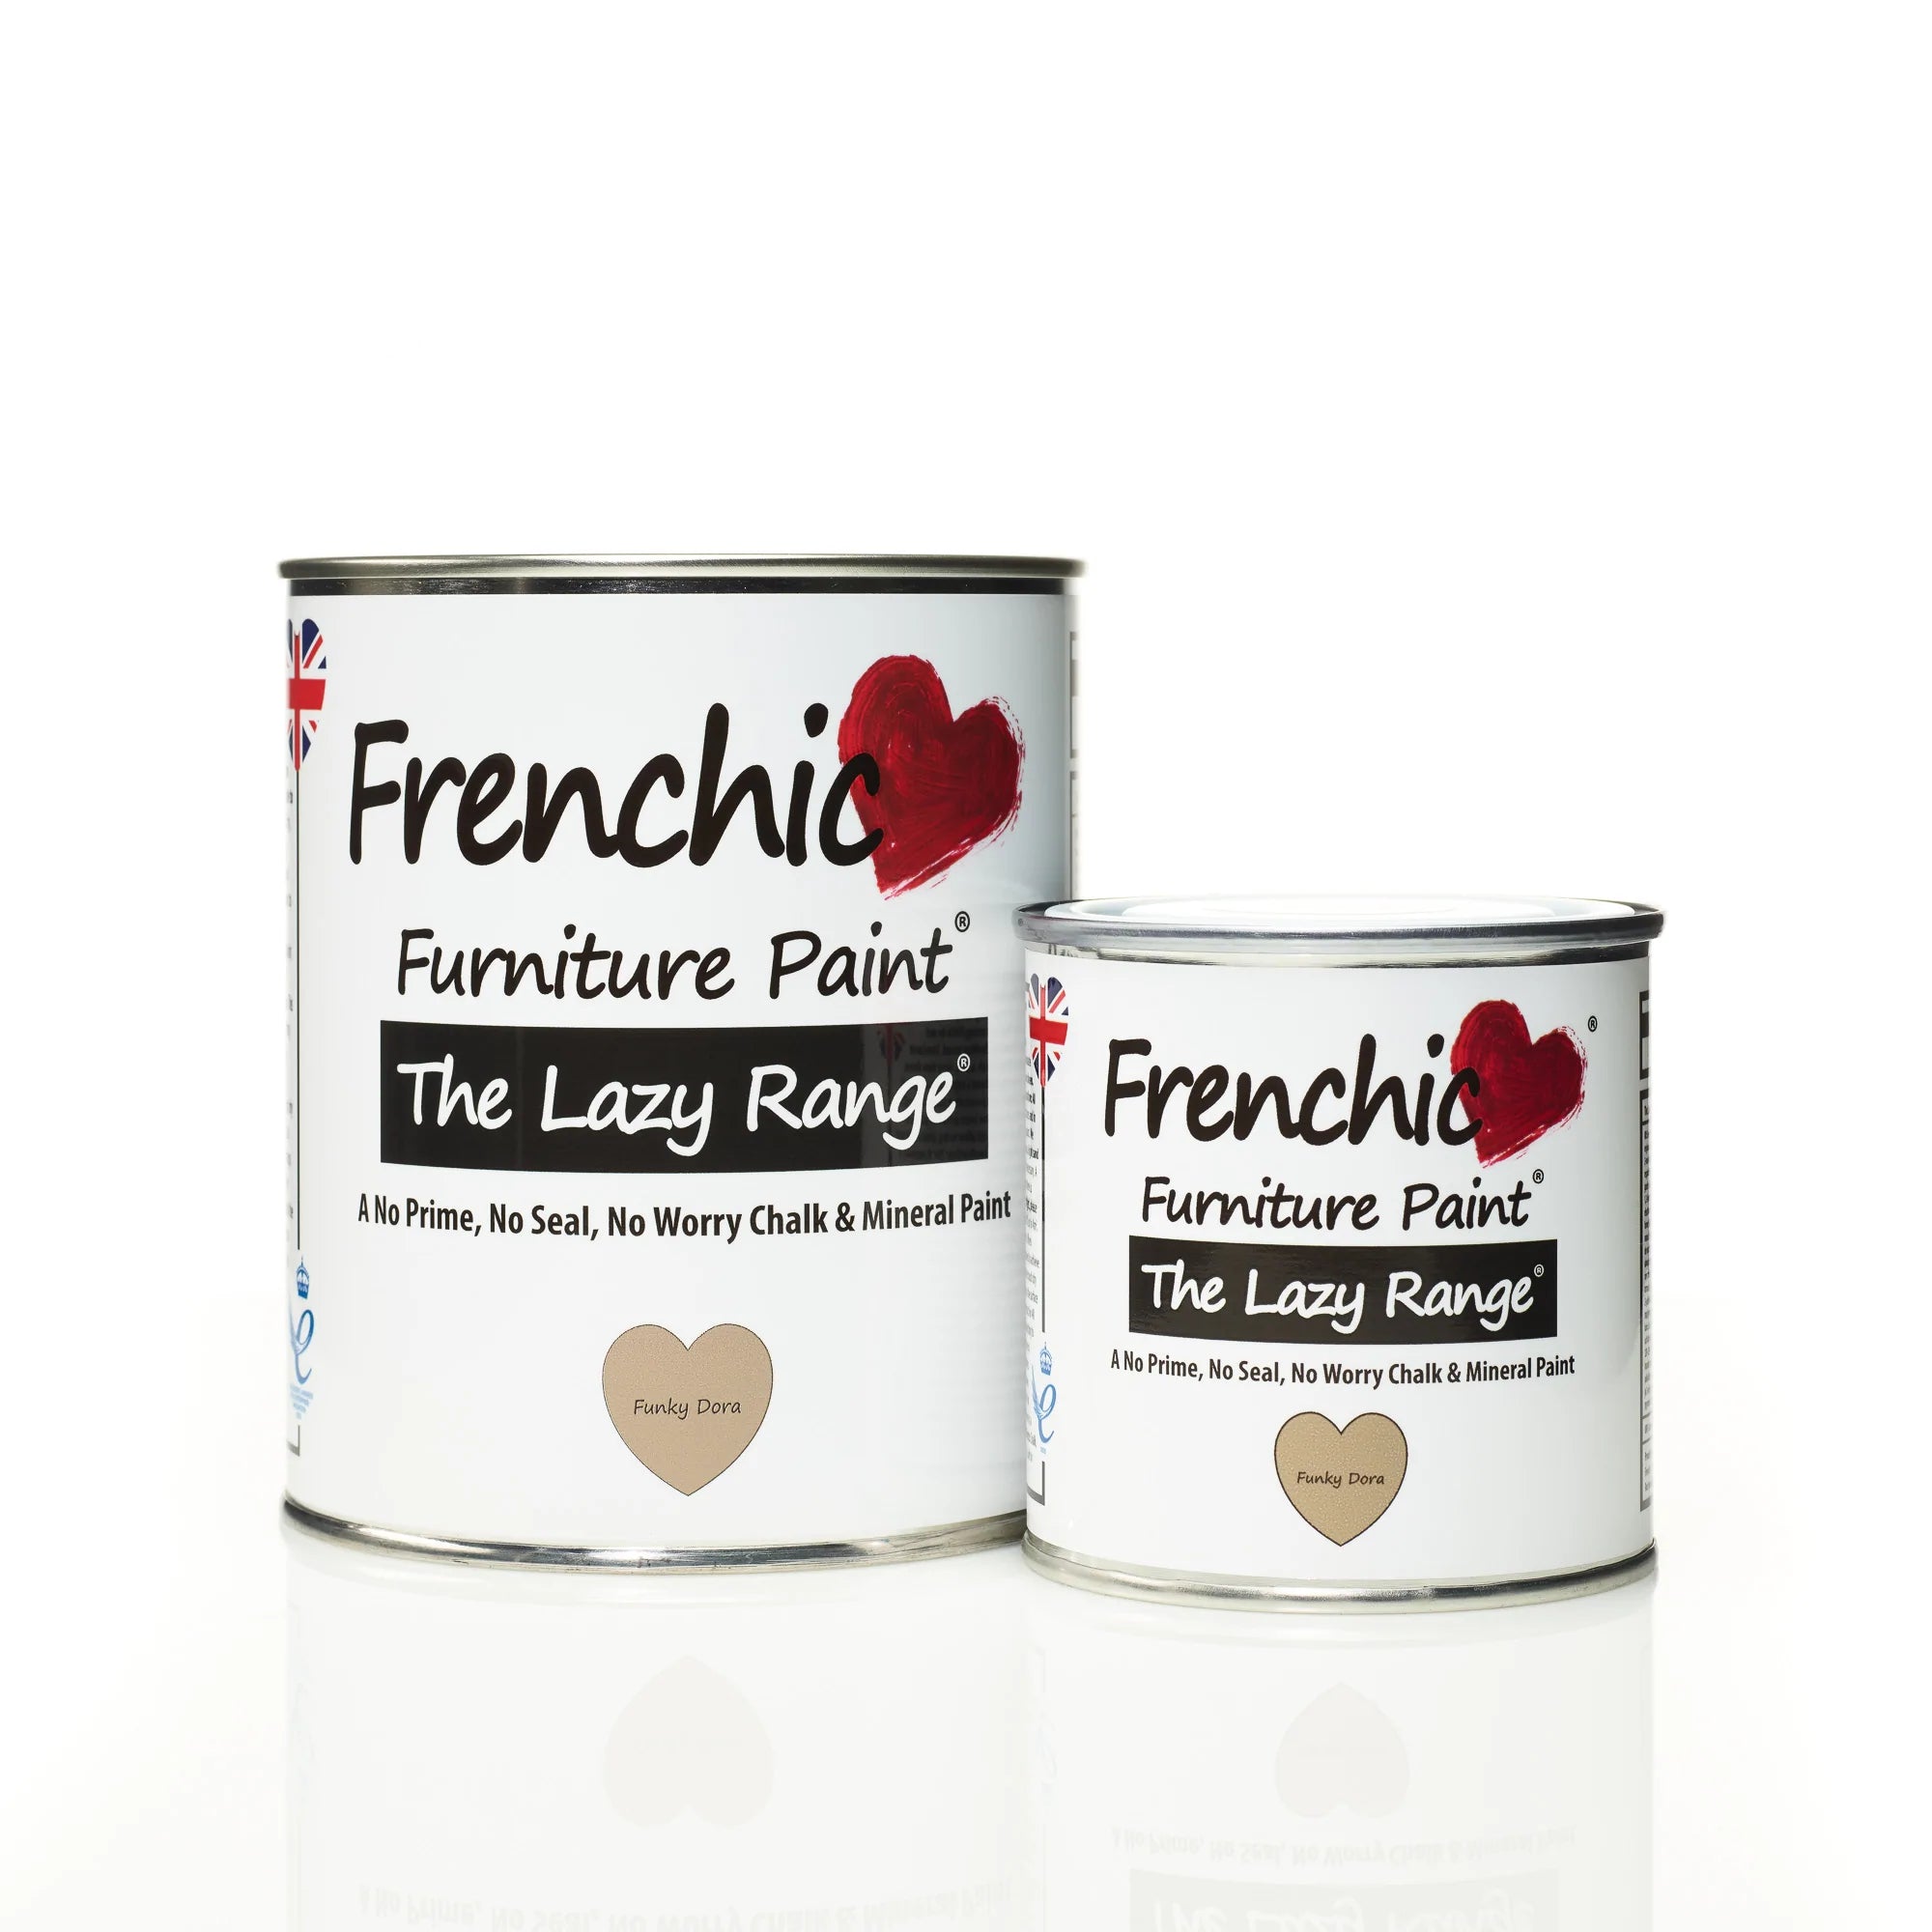 Frenchic Paint | Lazy Range - Funky Dora by Weirs of Baggot St